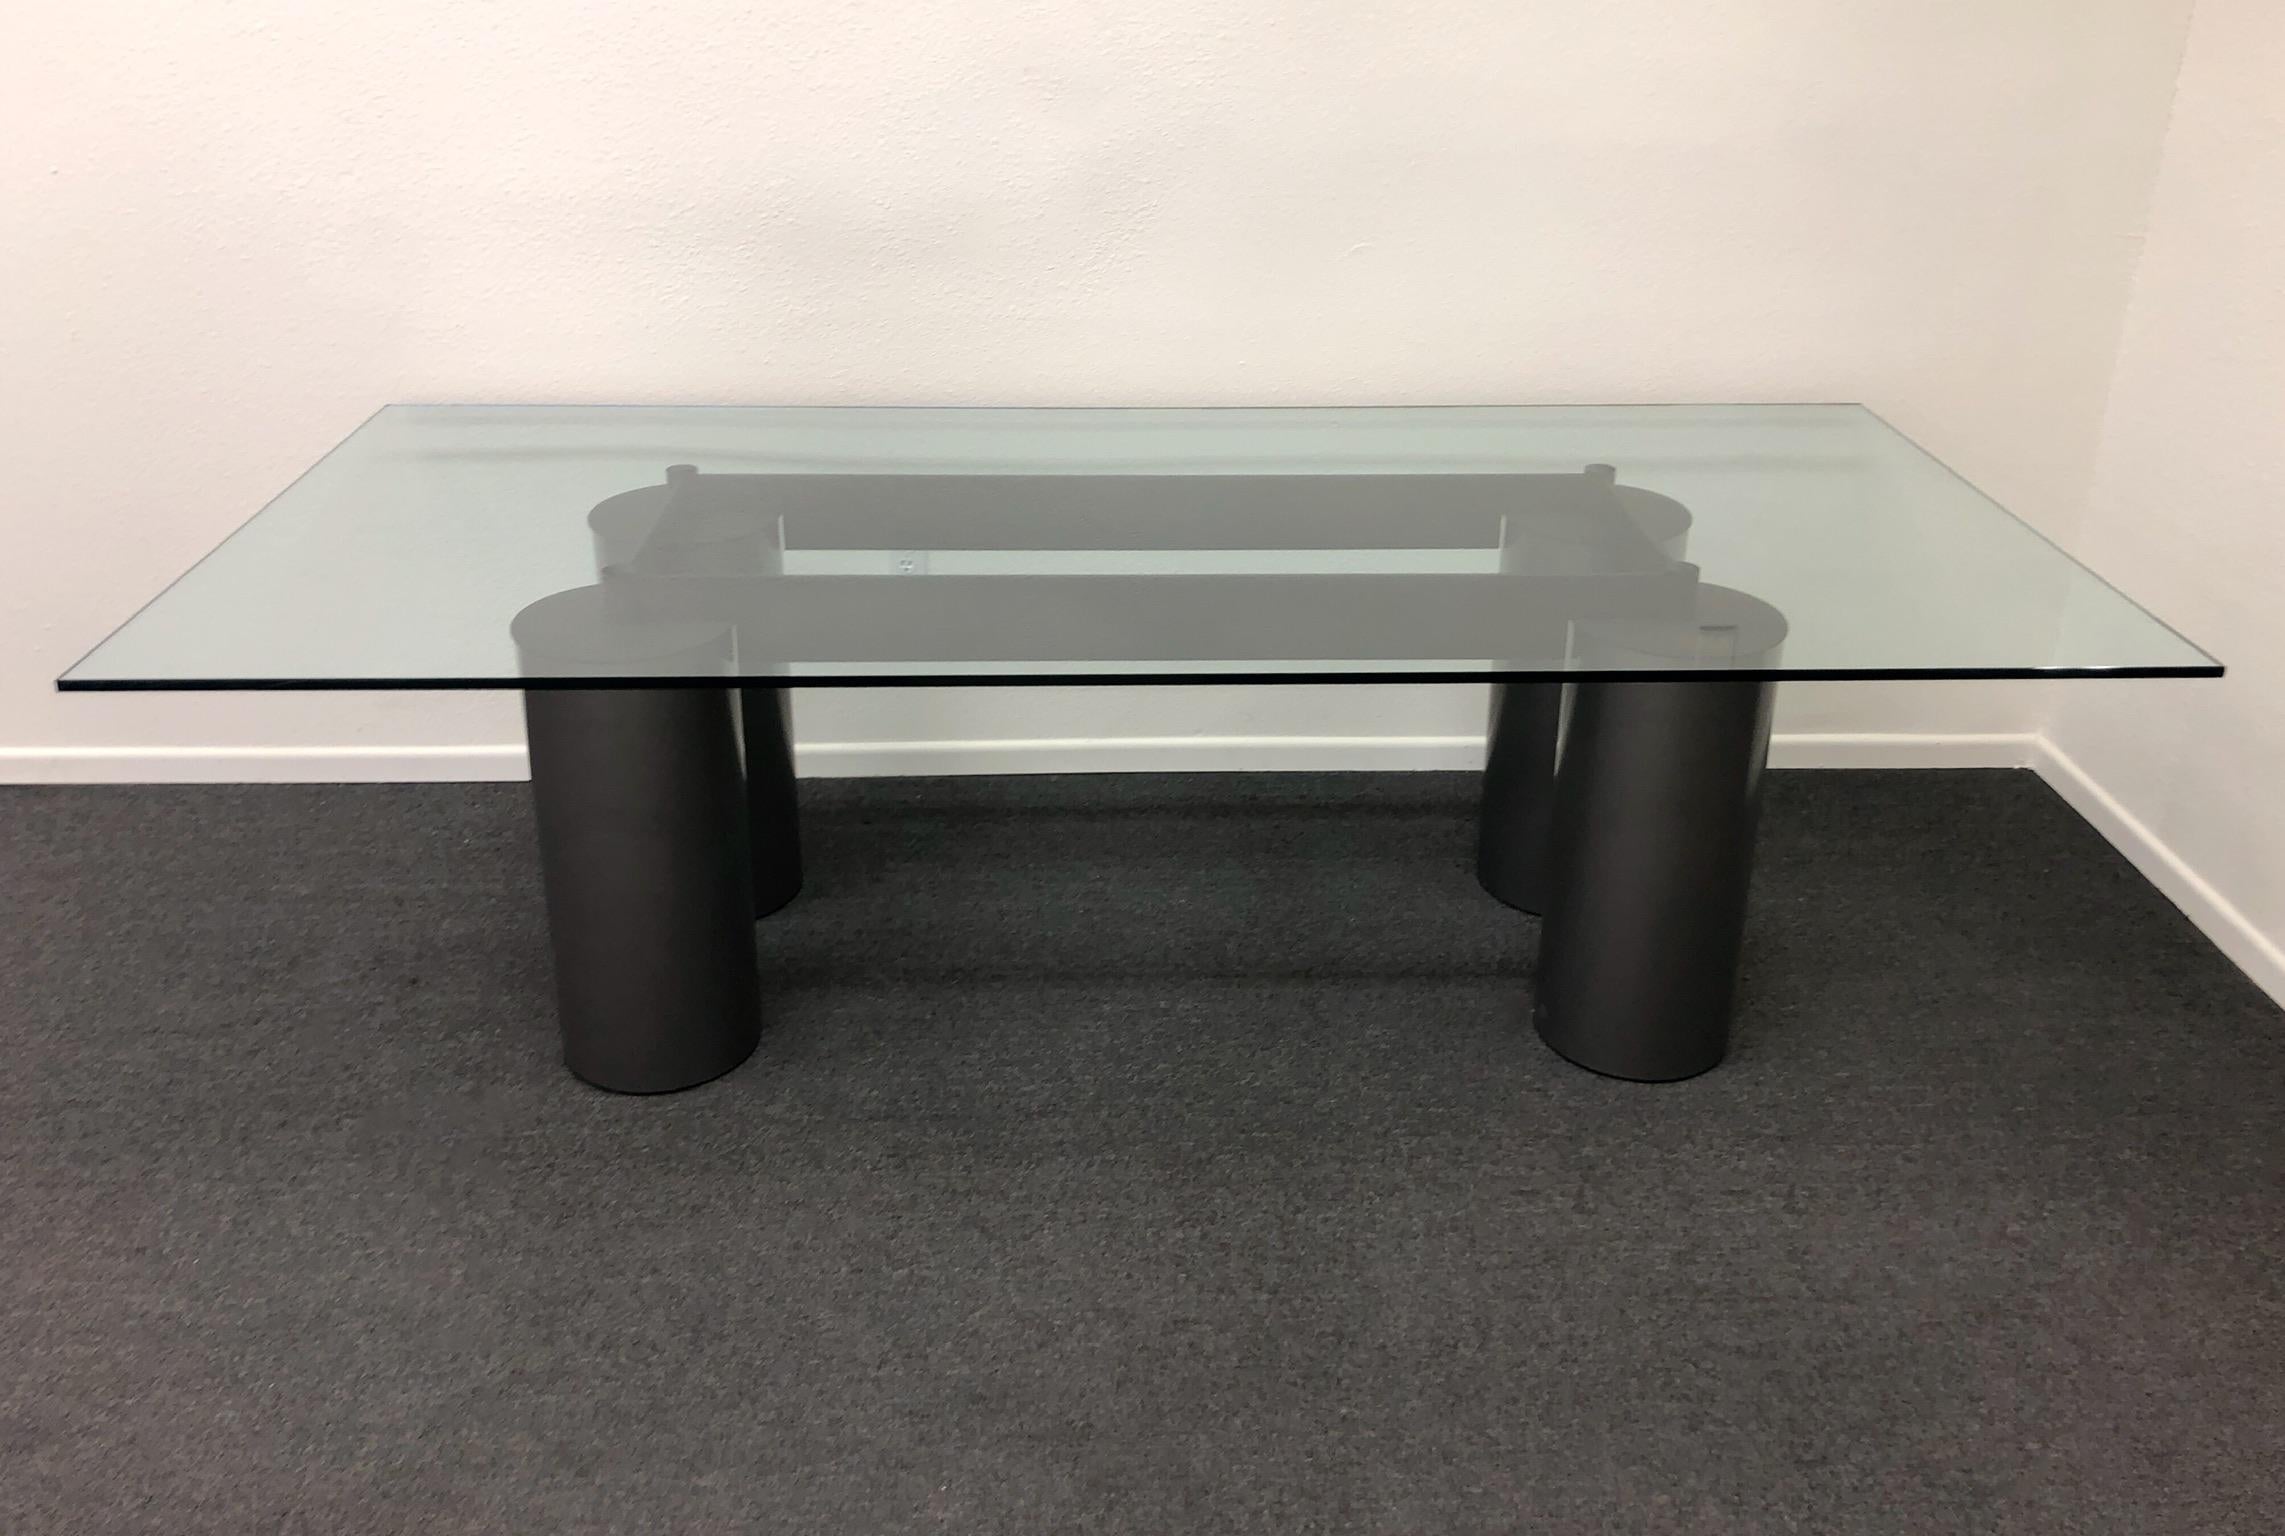 Late 20th Century Italian Glass and Steel Dining Table by Vignelli for Acerbis